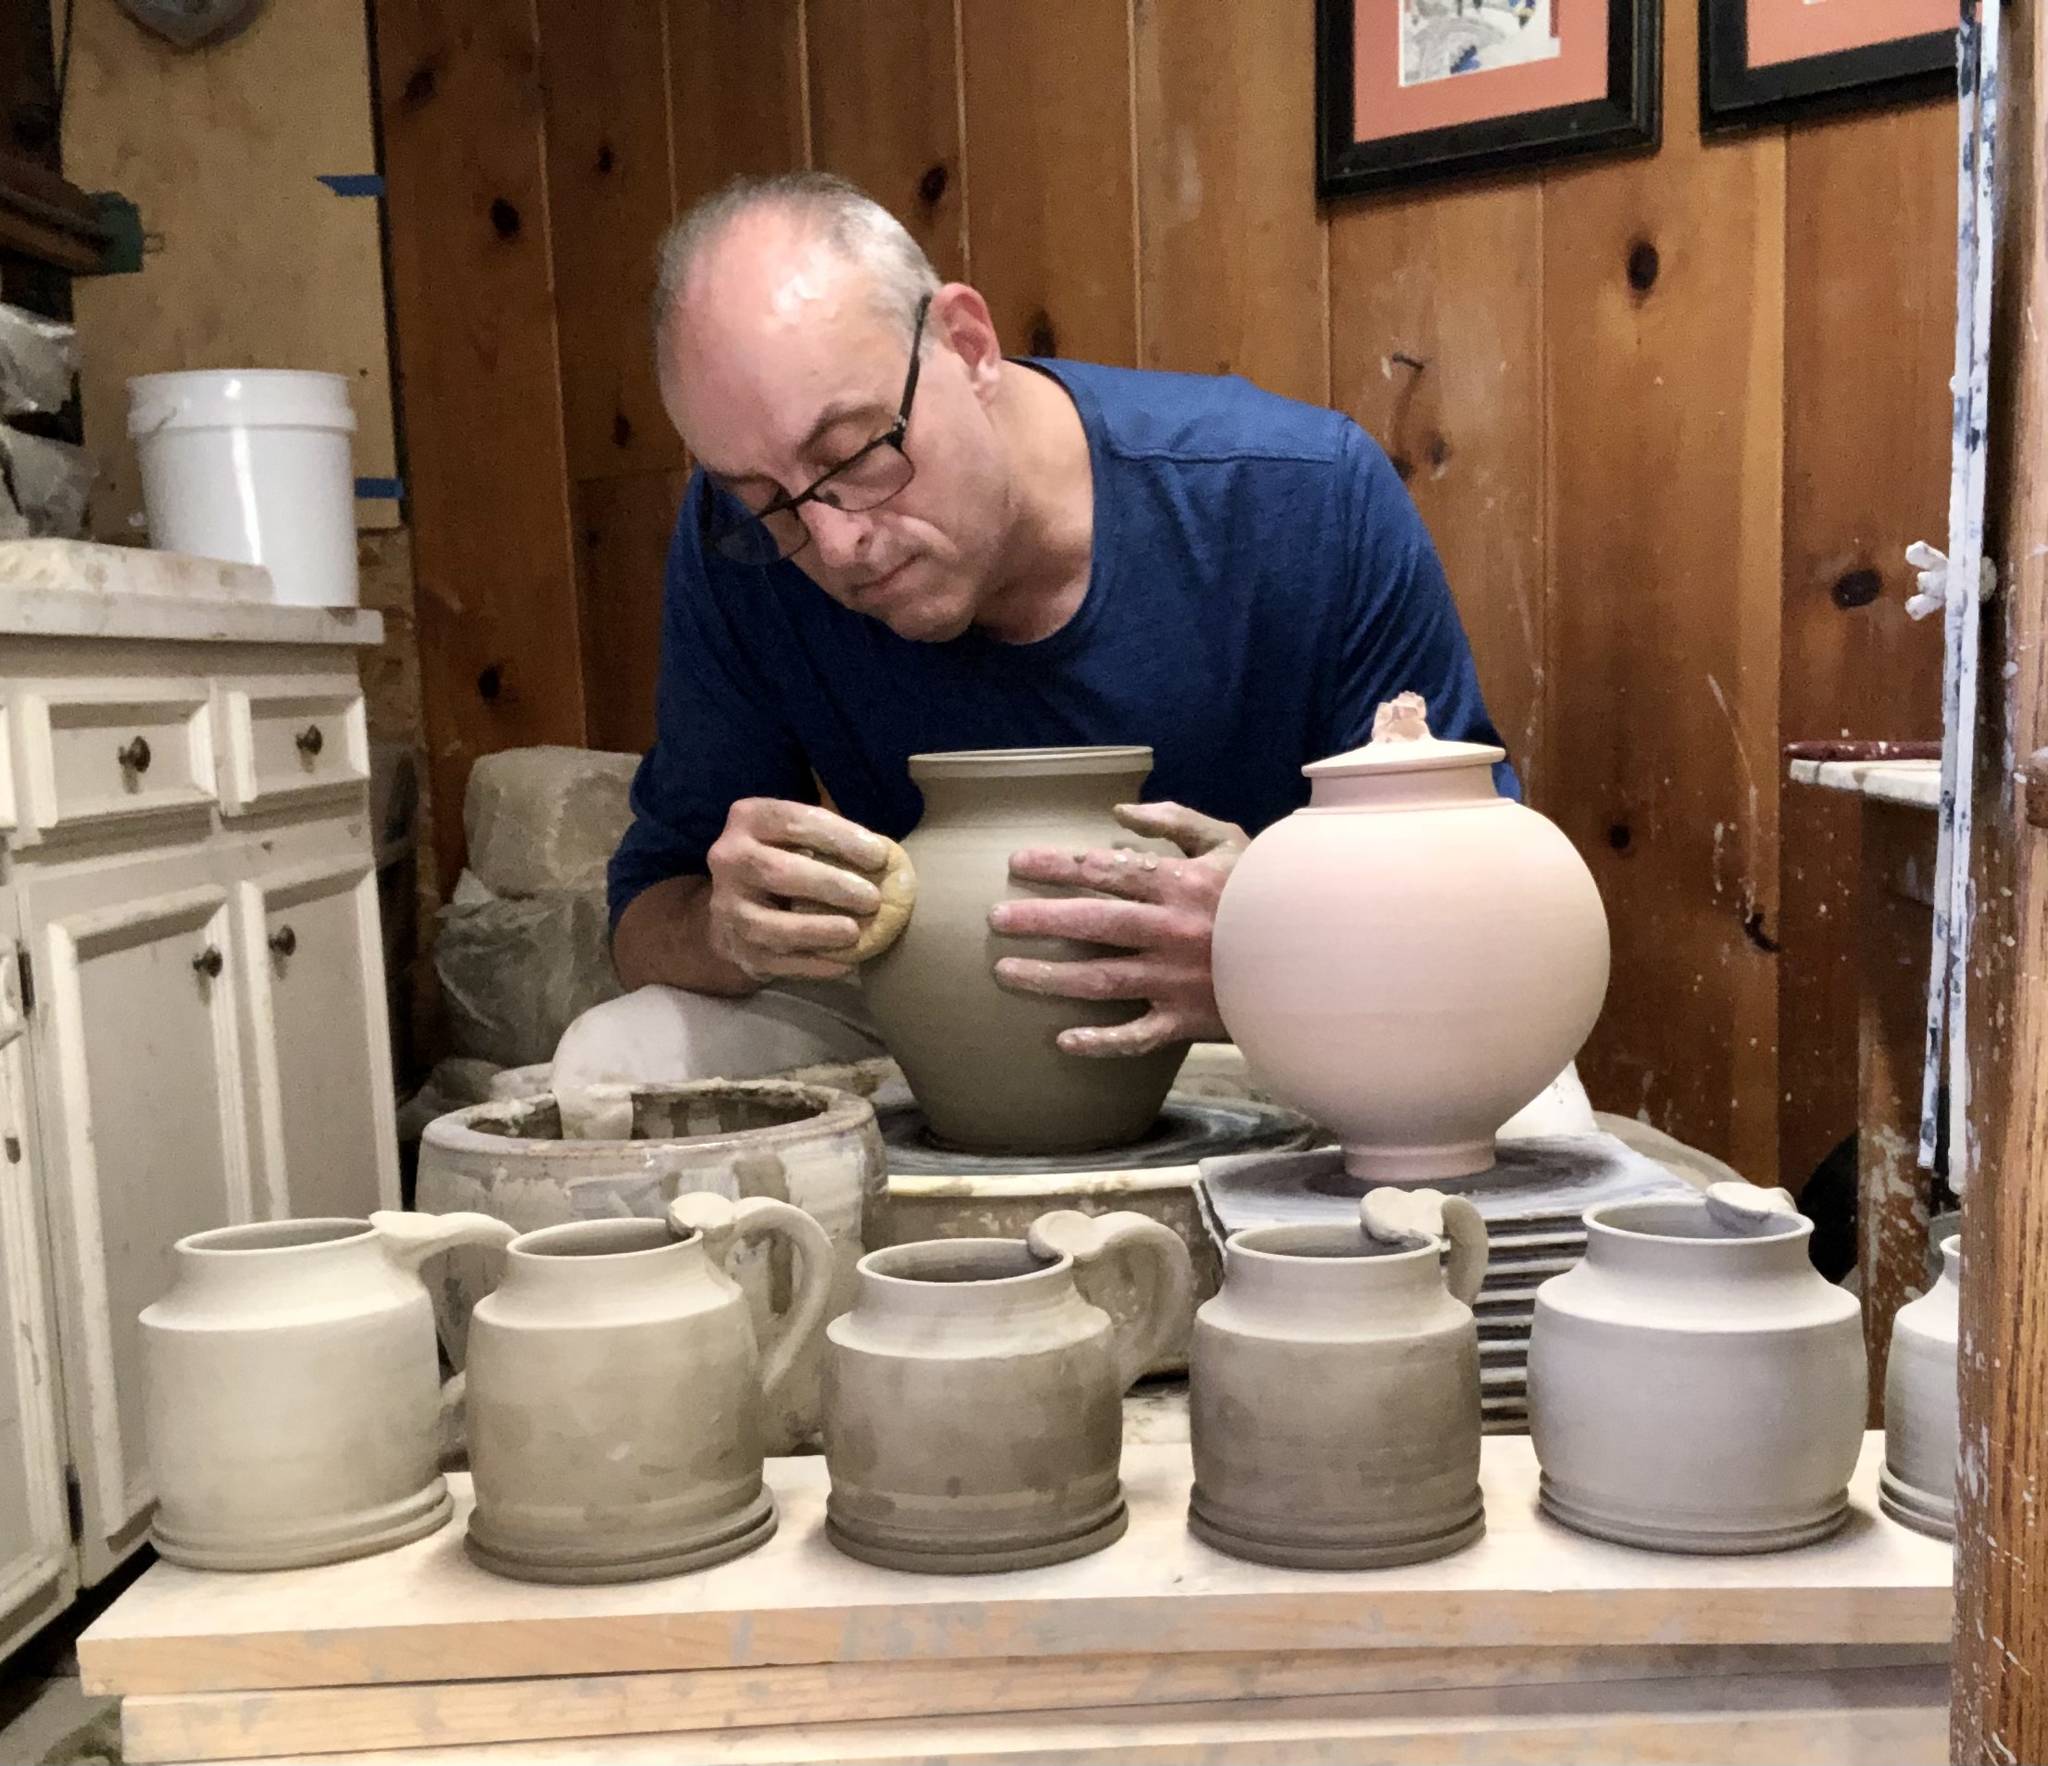 New member Charles LaFond works on a pottery creation at Freeland Art Studios. (Photos provided)